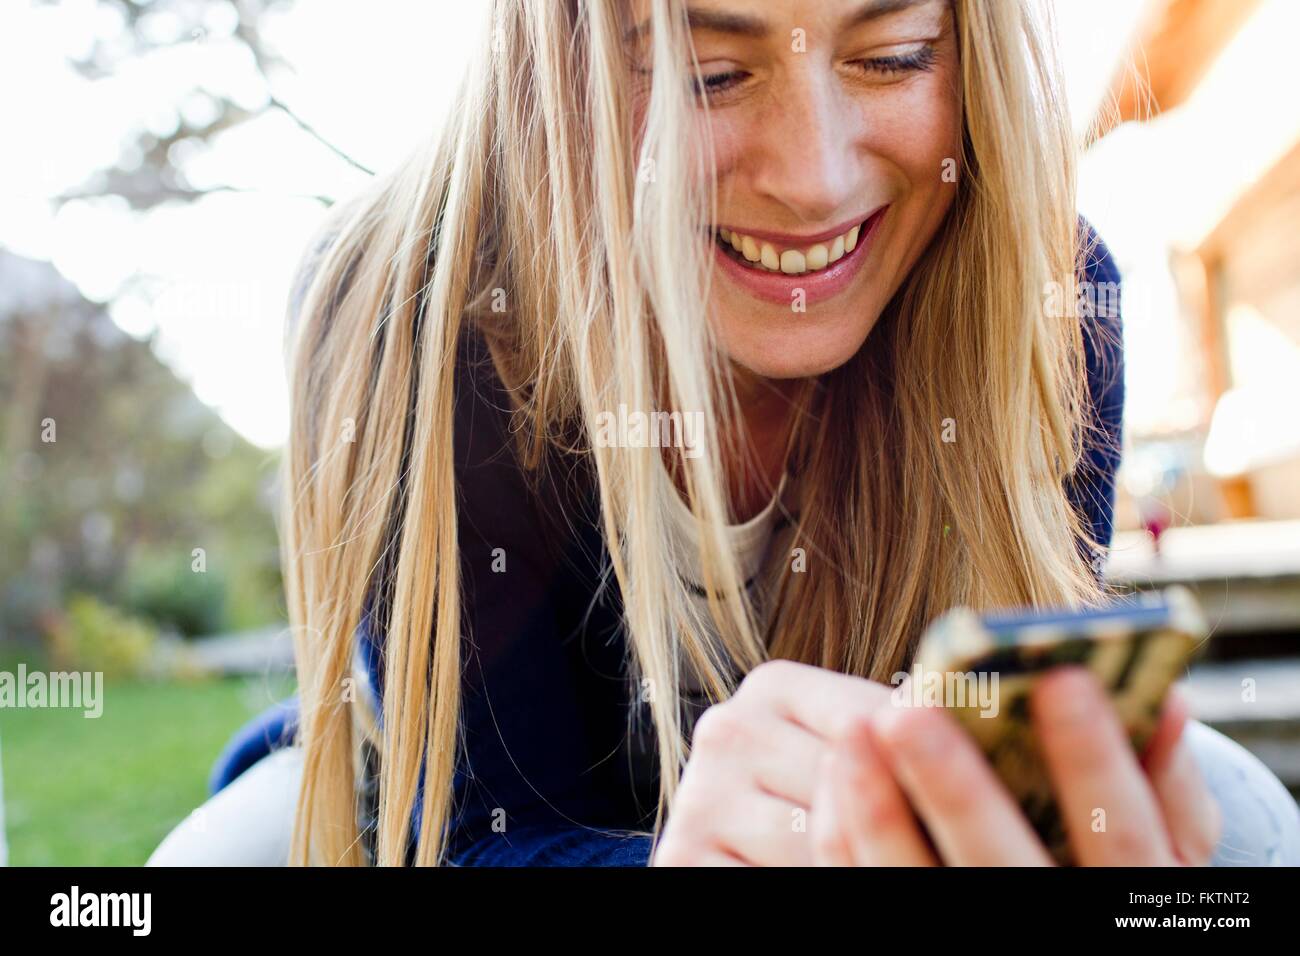 Mid adult woman using smartphone Banque D'Images